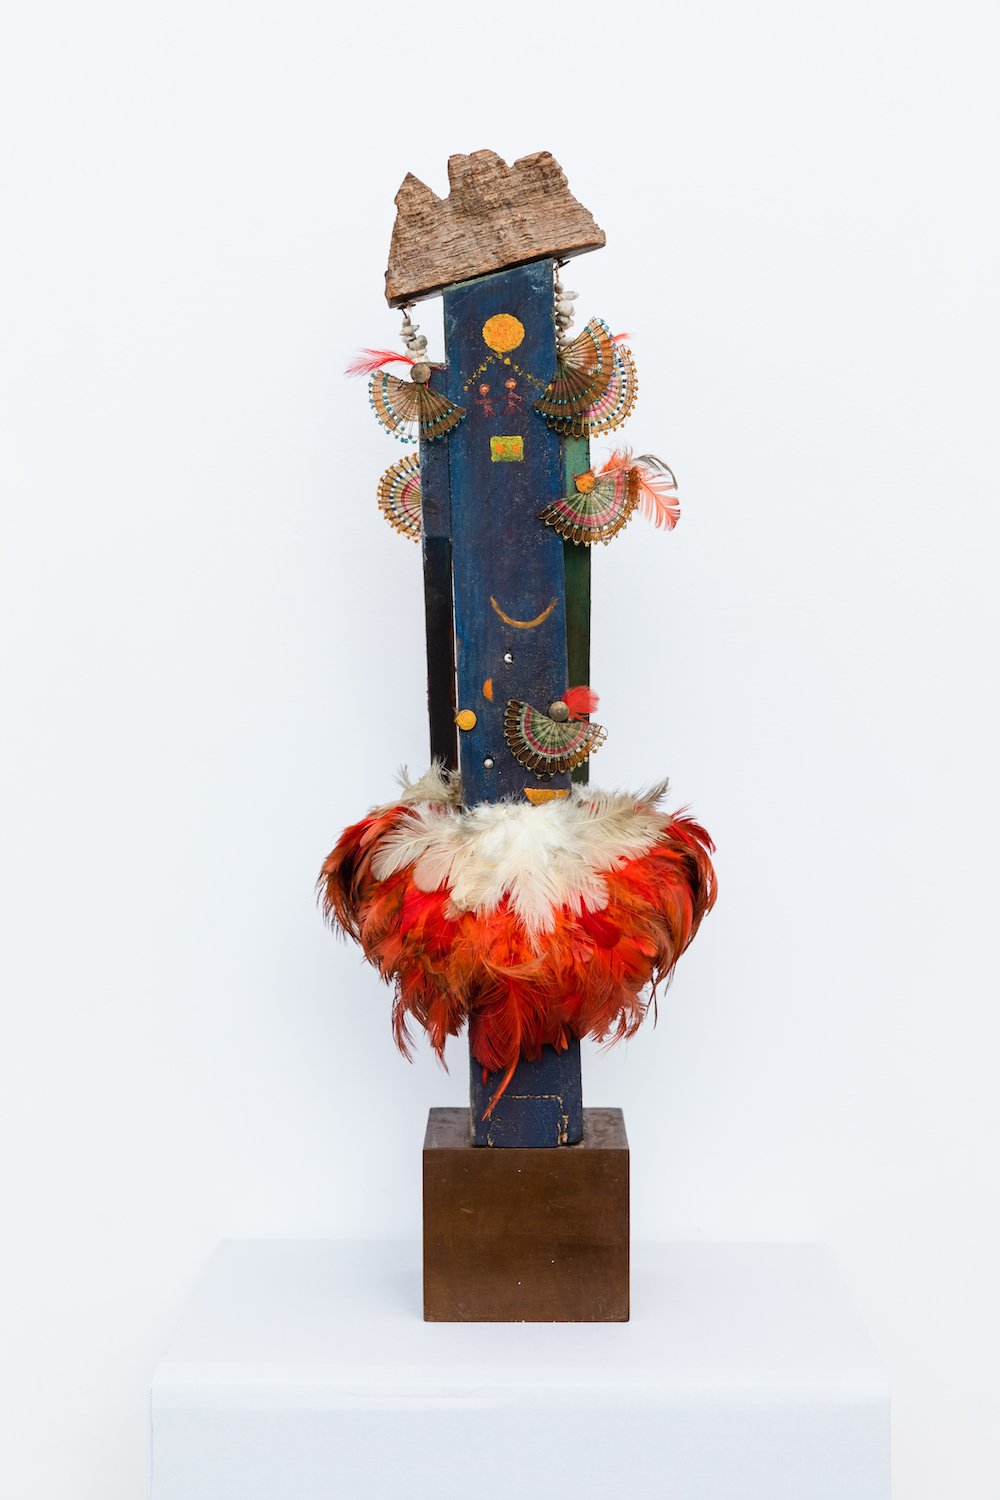  Alice Rahon,  Untitled (backside) , n/d, assemblage with wood, feathers, shells, and oil, 22 x 6 x 7 inches (55.9 x 15.2 x 17.8 cm) 